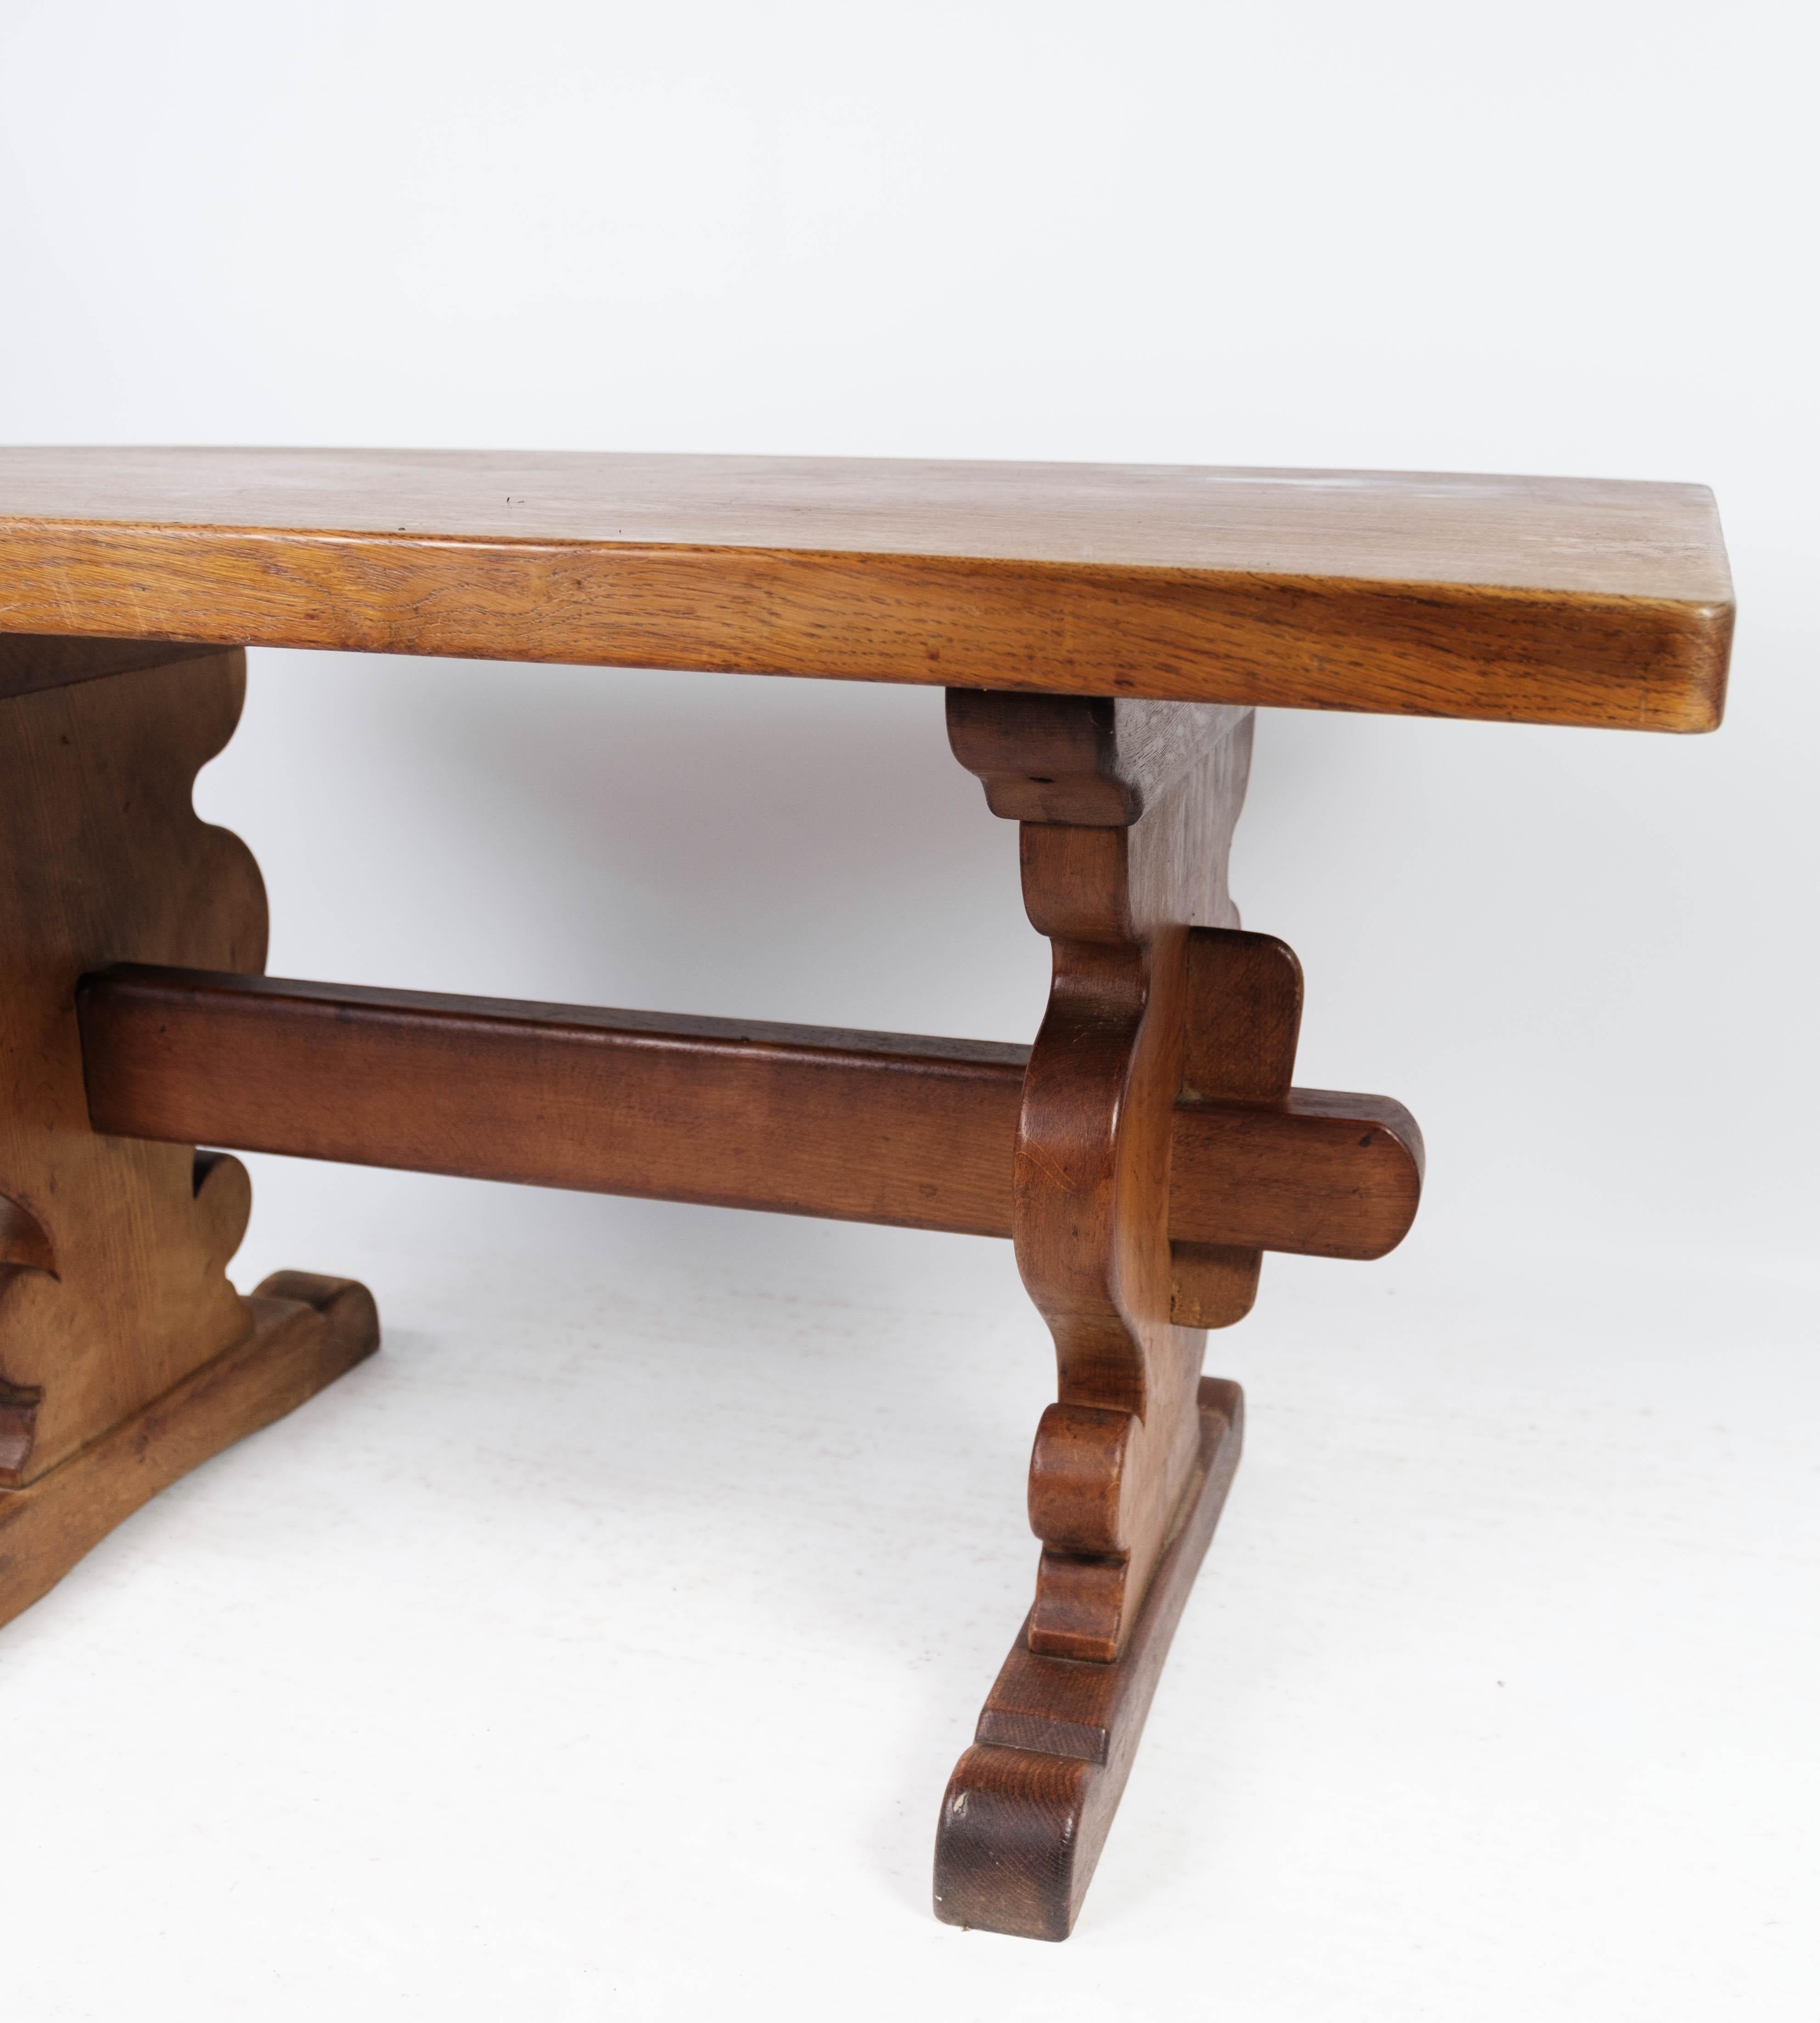 Danish Coffee Table of Oak, and in Great Vintage Condition from the 1970s